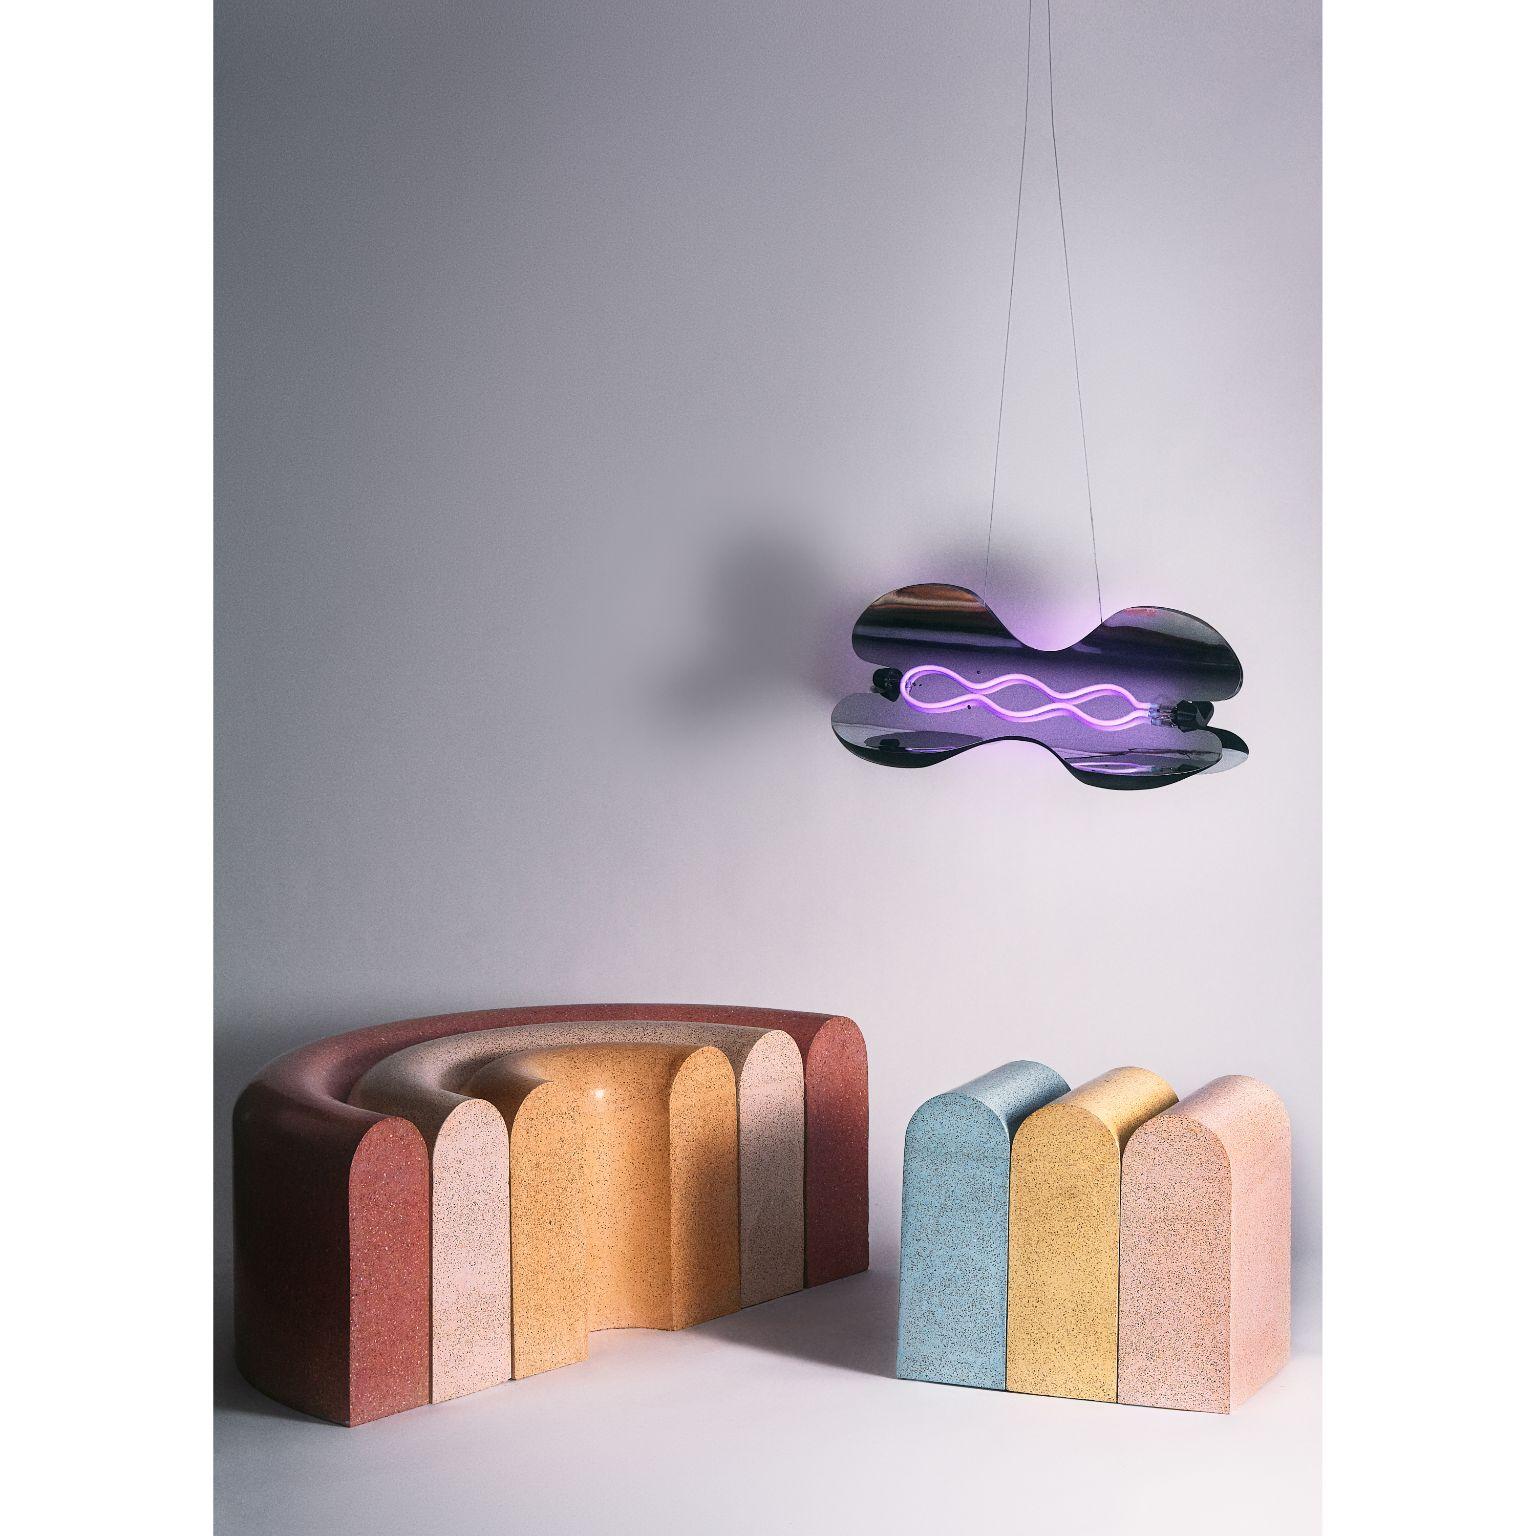 Set of 2 terrazzo rainbow nench and stool by Lilia Cruz Corona Garduño
Hapiness series
Dimensions: W 30.5 x D 50 x H 43 cm
Materials: Terrazzo (Pigmented concrete and granulated marble)

Platalea studio was born out of a passion for both art